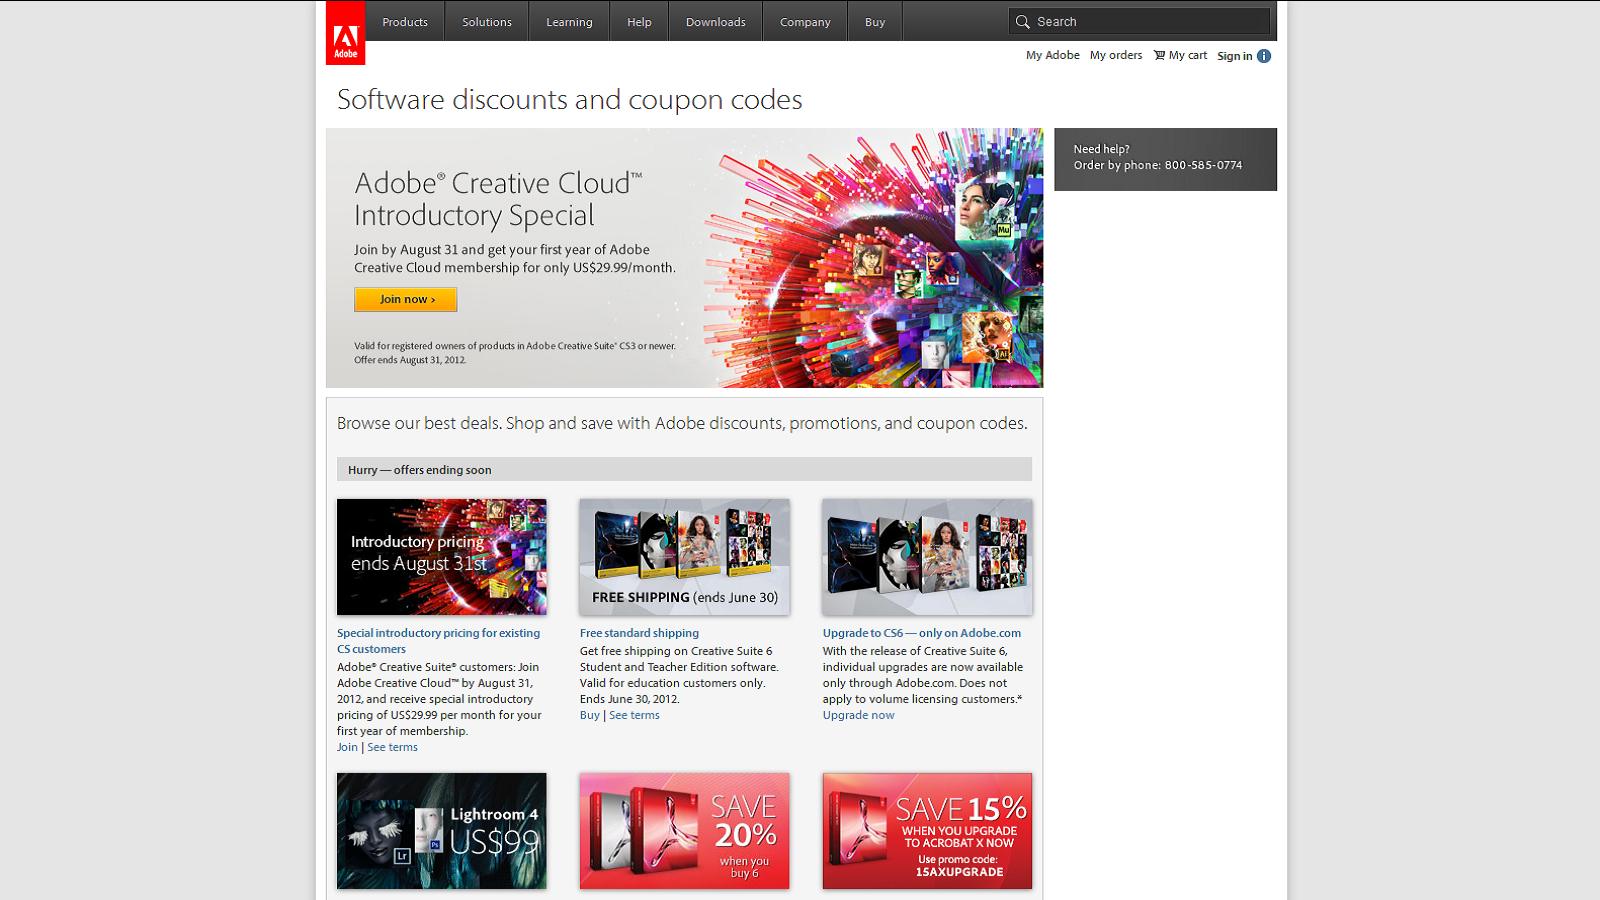 Find Software Discounts and Coupon Codes On Adobe Products!